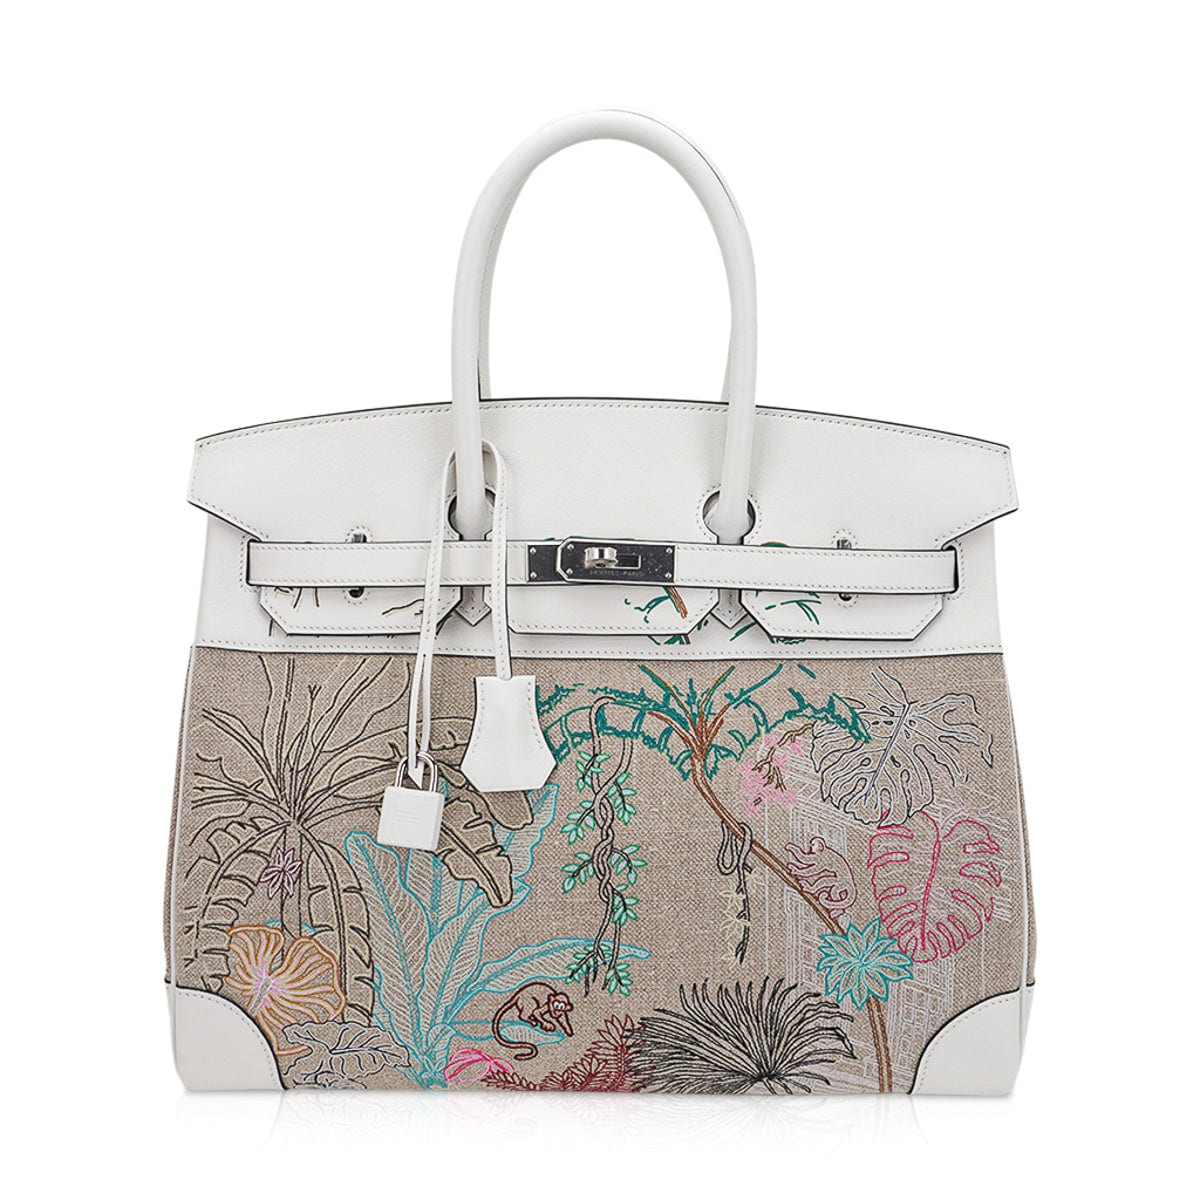 Hermes Limited Edition Birkin 20 Sellier Bag Neige (Snow) White Faubou –  Mightychic